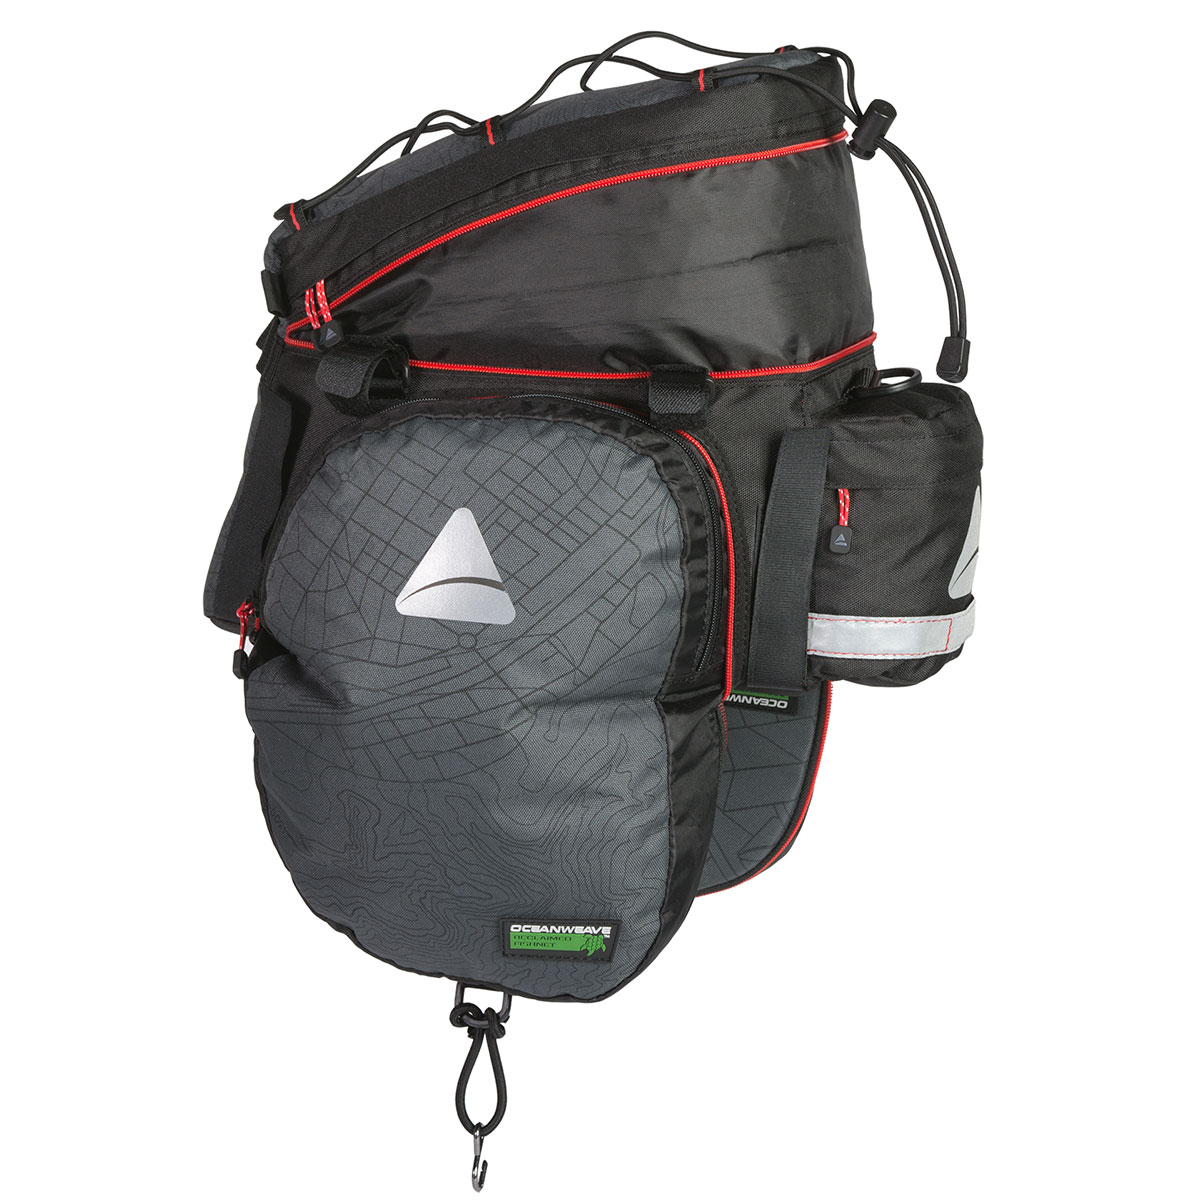 Axiom Oceanwave trunk Bag available at Pedego Dealers in Canada